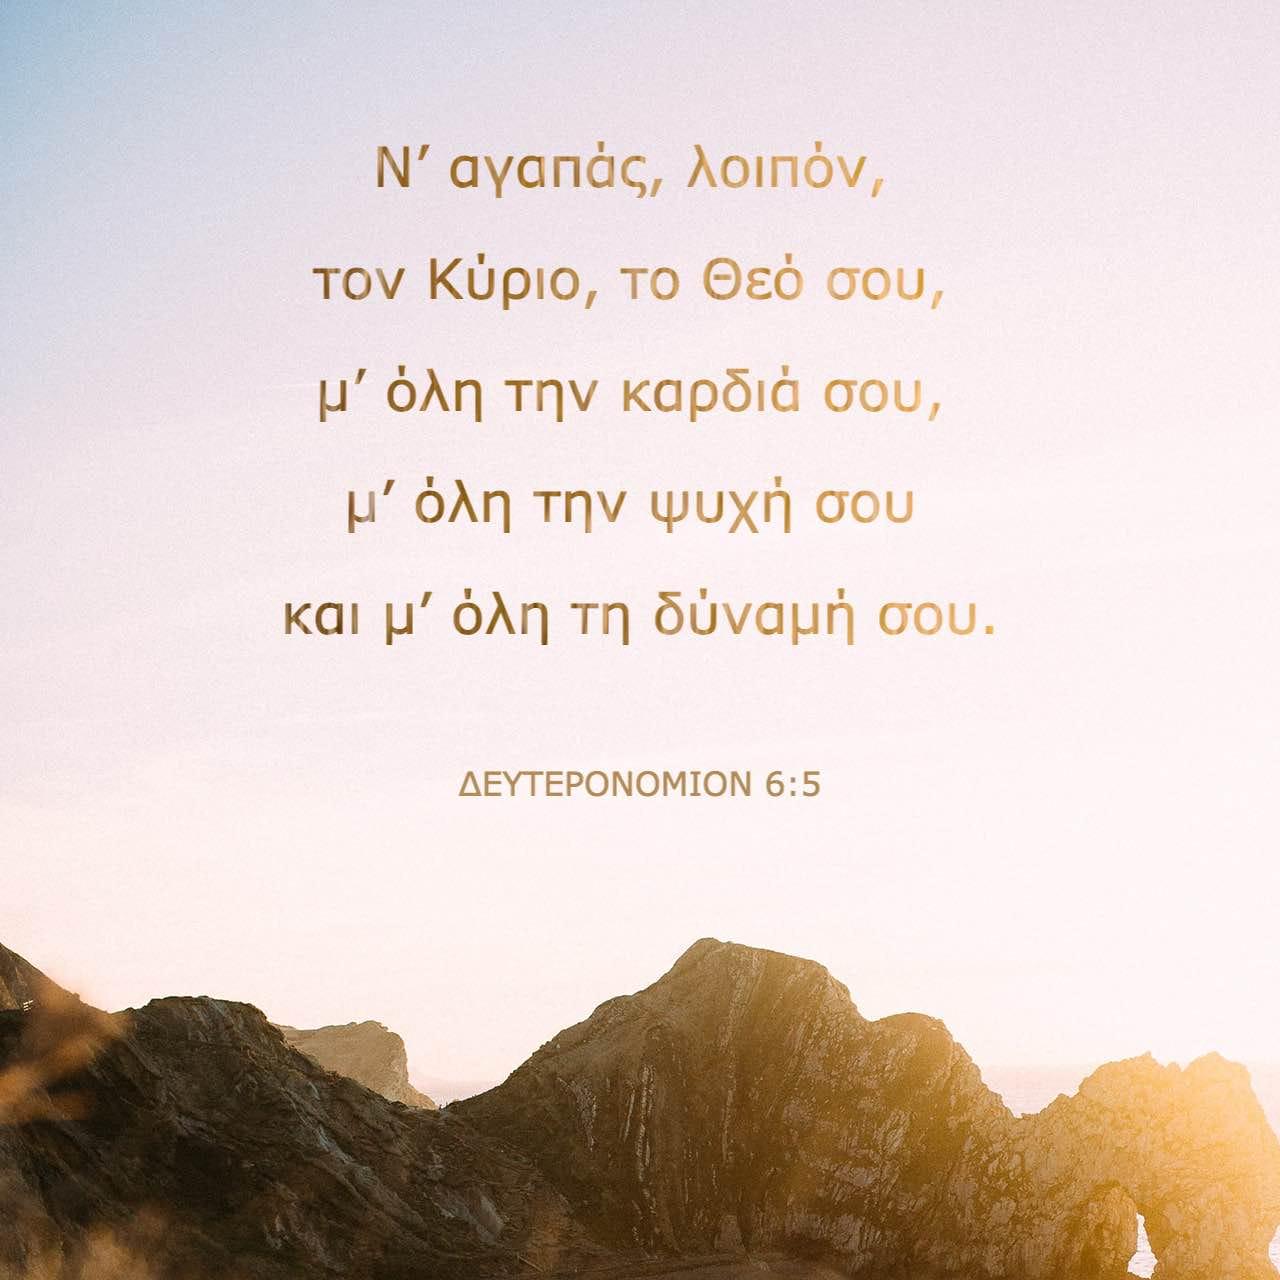 Bible Verse of the Day - day 157 - image 14190 (ΔΕΥΤΕΡΟΝΟΜΙΟΝ 6:4-9)